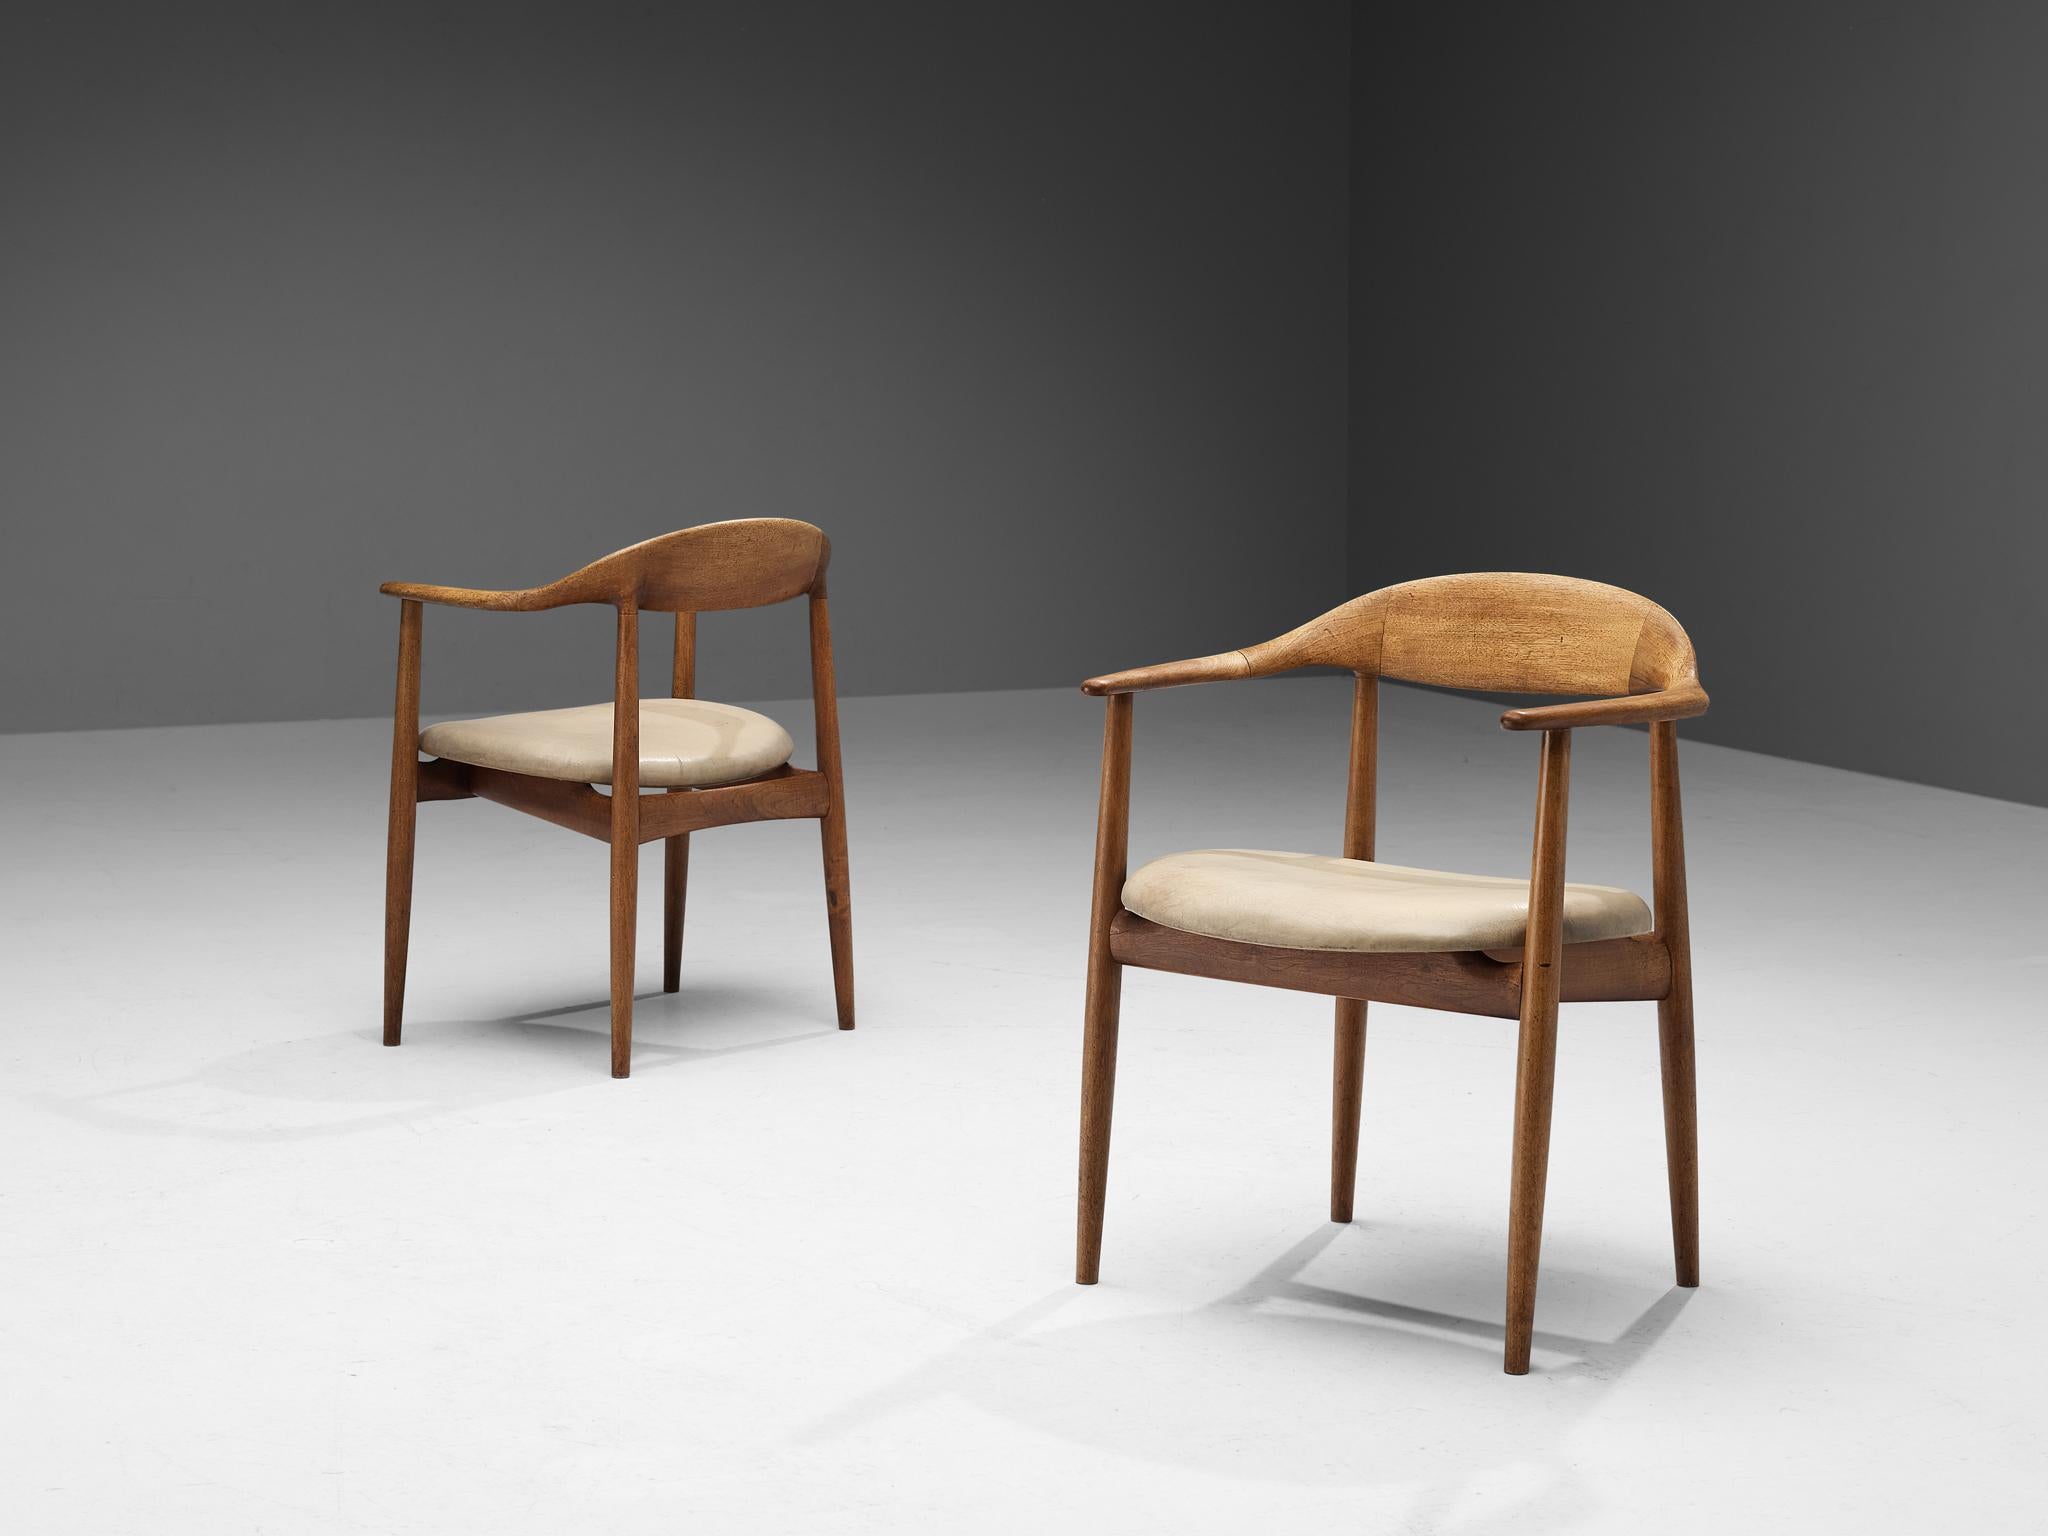 Kurt Østervig for Brande Møbelindustri, pair of armchairs model 27, teak, leather, Denmark, 1950s.

Beautiful pair of dining chairs designed by Kurt Østervig for Brande Møbelindustri. This organic looking pair of armchairs is made with an